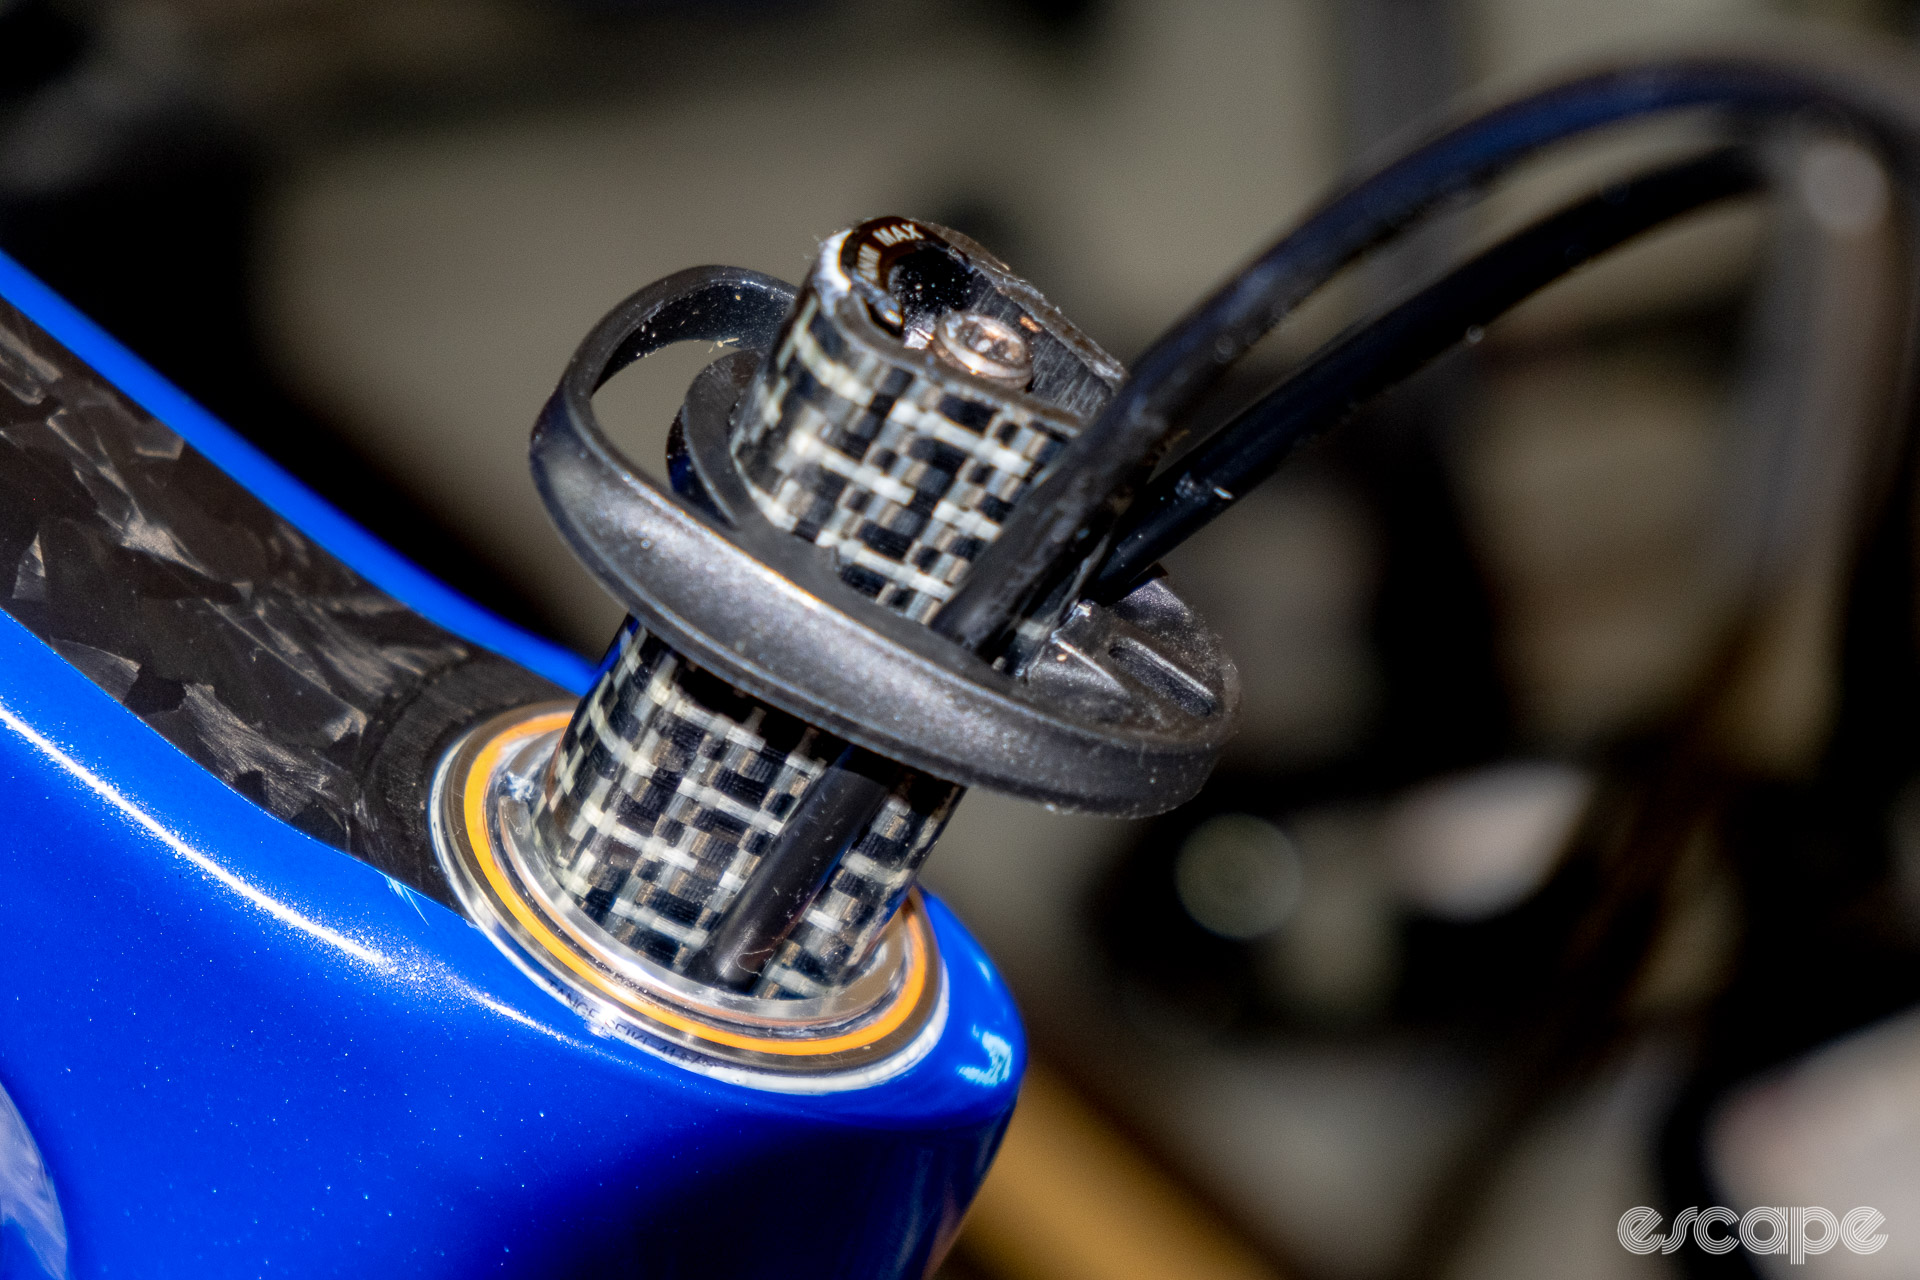 The photo shows the Delta steerer, headset cap, and brake hose routing through into the headset on a new Cannondale SuperSix Evo Hi-Mod 2 with 10 mm of spacers.